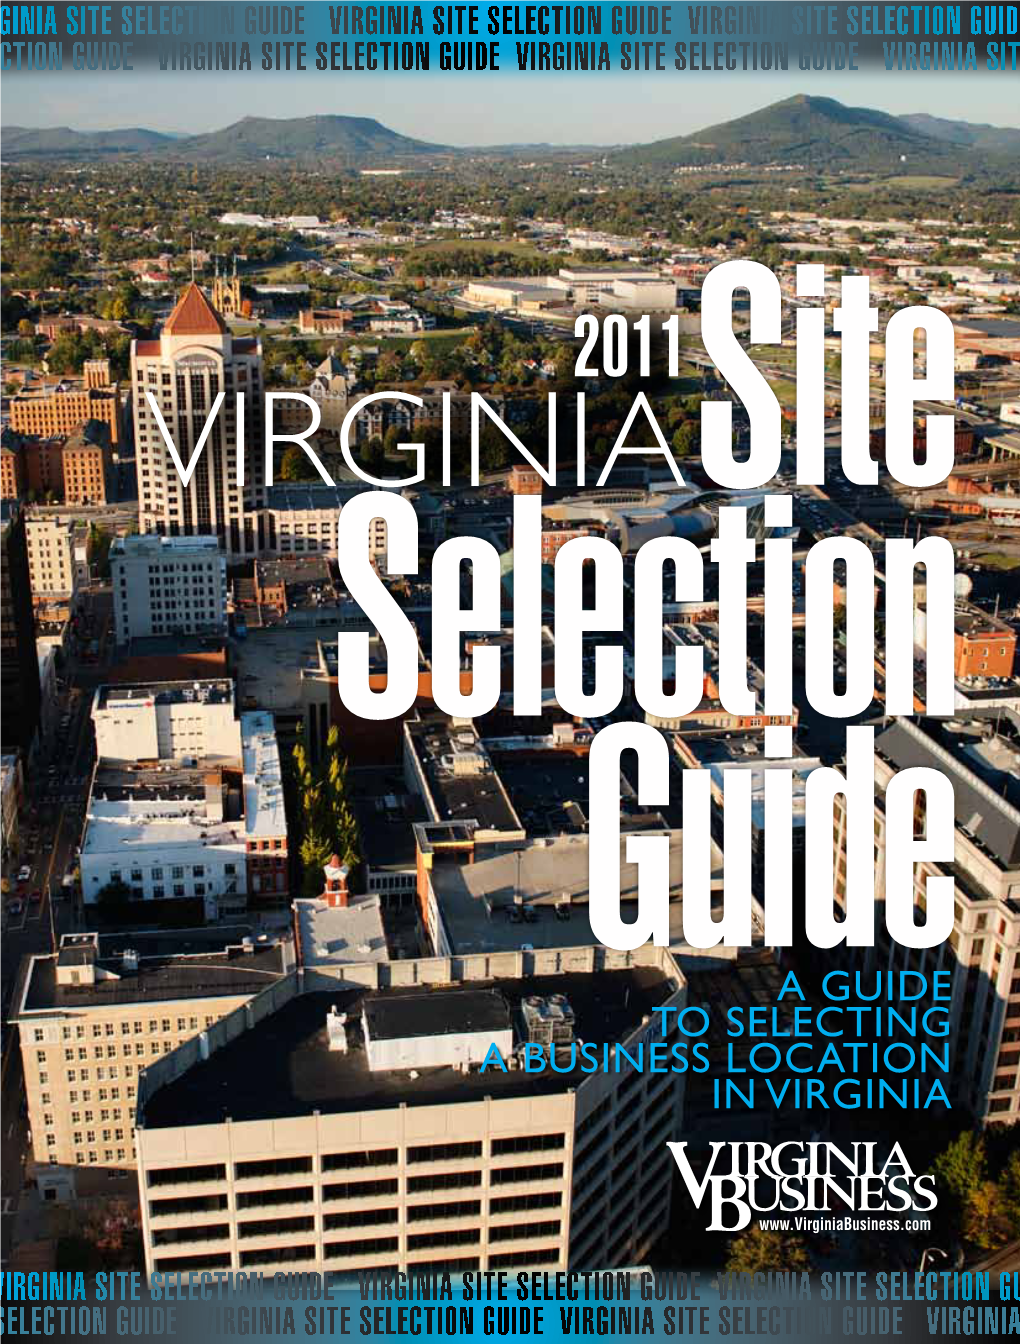 A Guide to Selecting a Business Location in Virginia